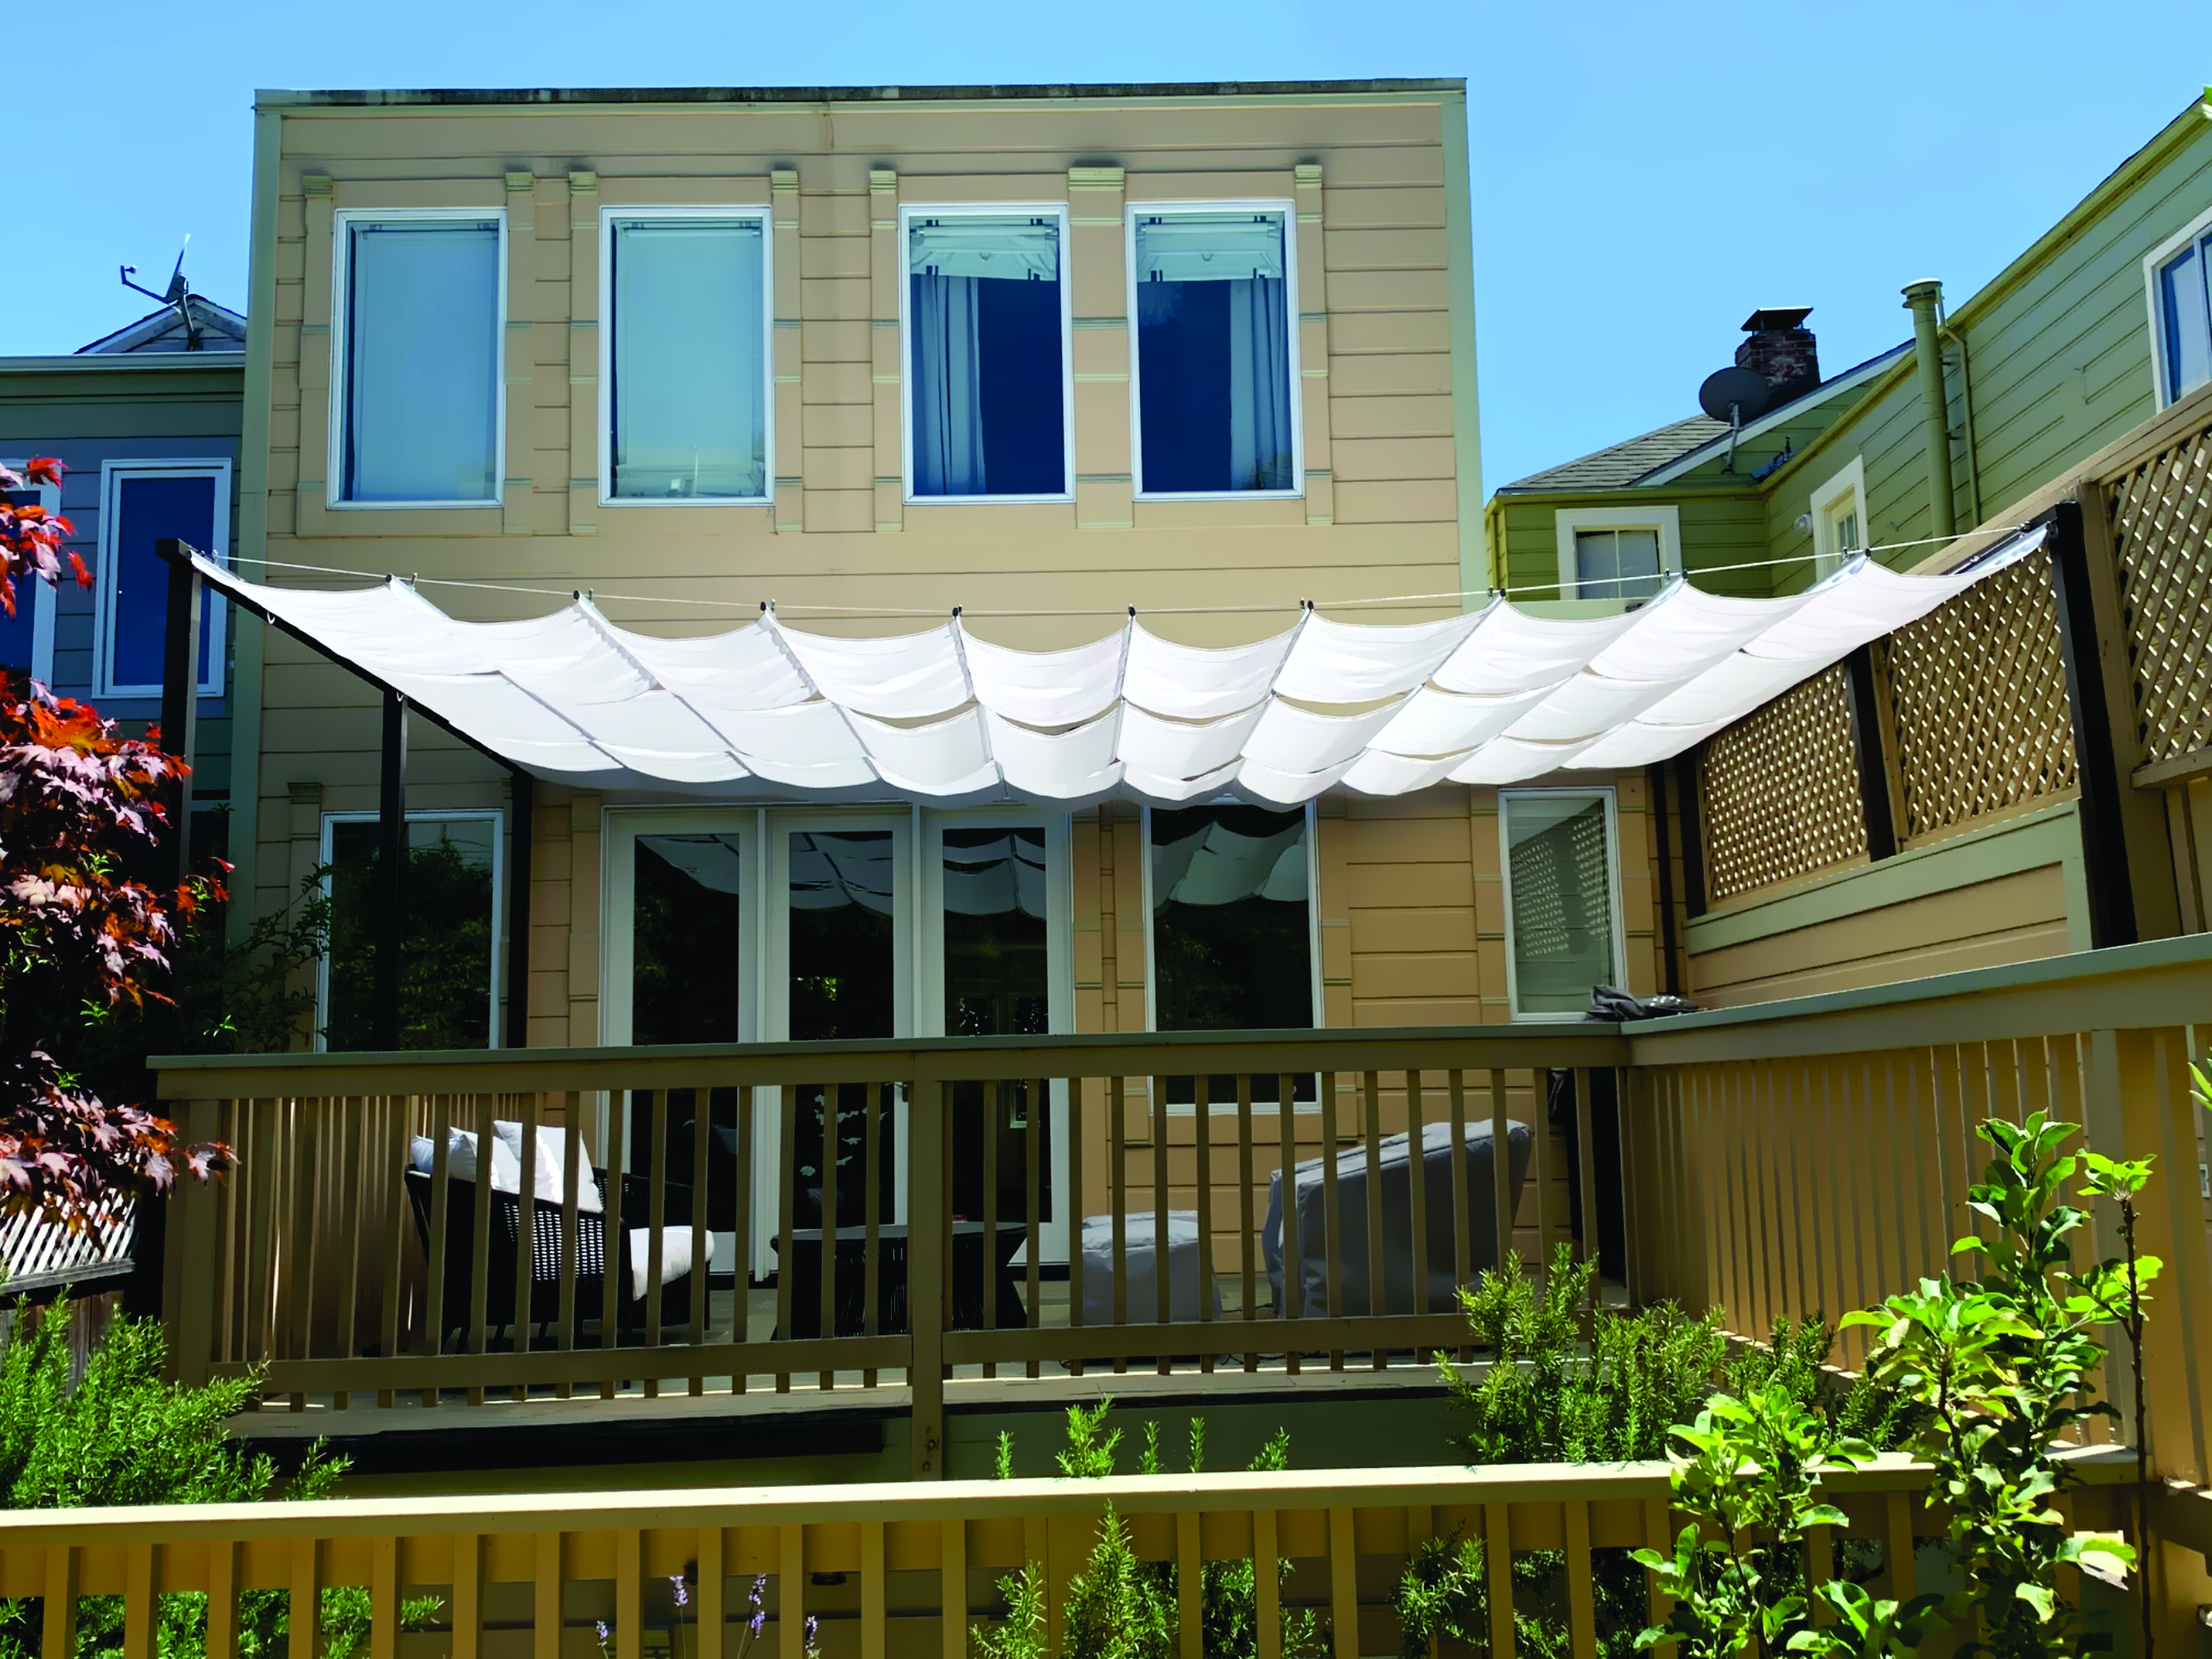 Sunset Canvas Awning Fabric Awnings Retractable Awnings Canopies Shading Structures Infinity Canopy System Arcadia Louvered Shading System